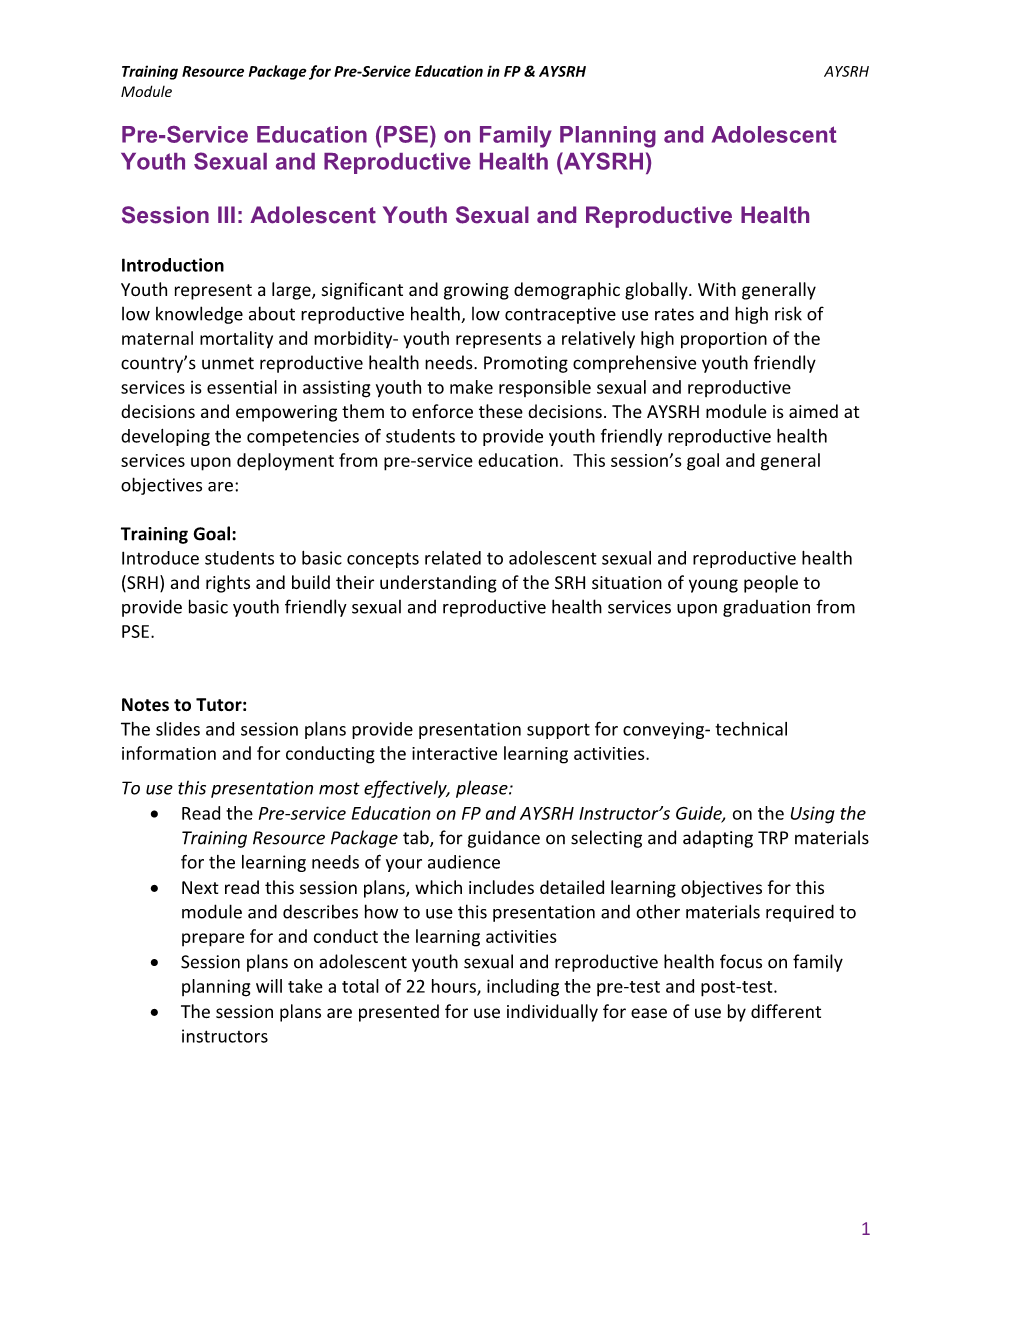 Training Resource Package for Pre-Service Education in FP & AYSRH AYSRH Module